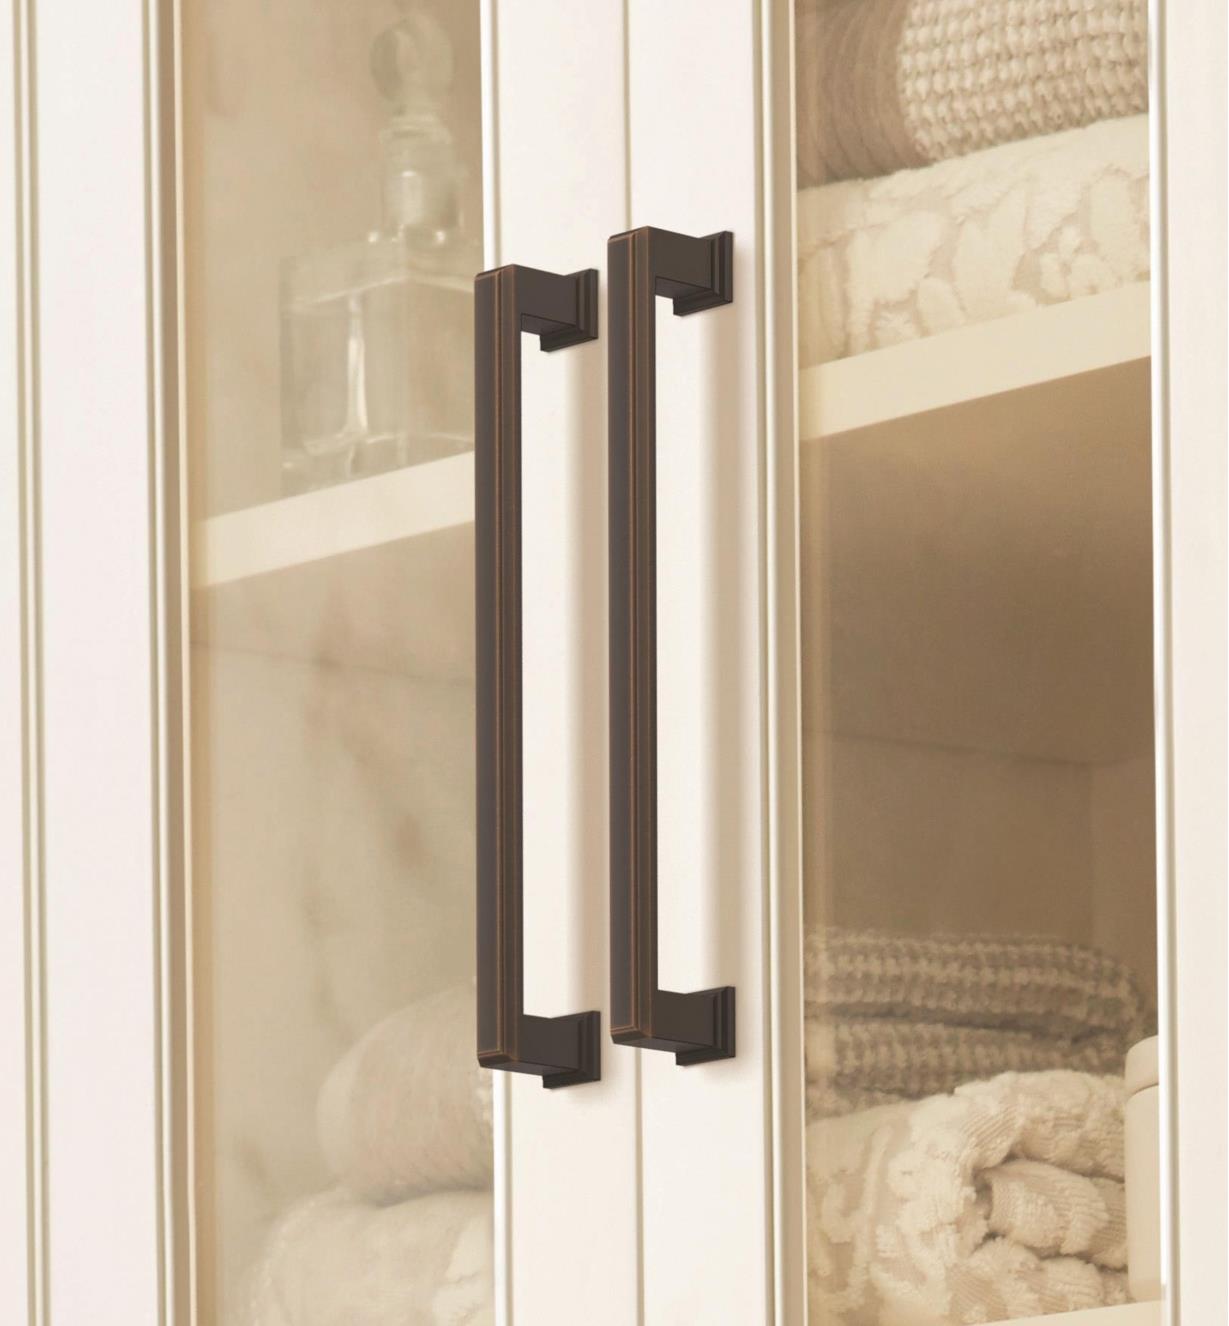 Two oil-rubbed bronze Appoint handles connected vertically to two cupboard doors with glass centers